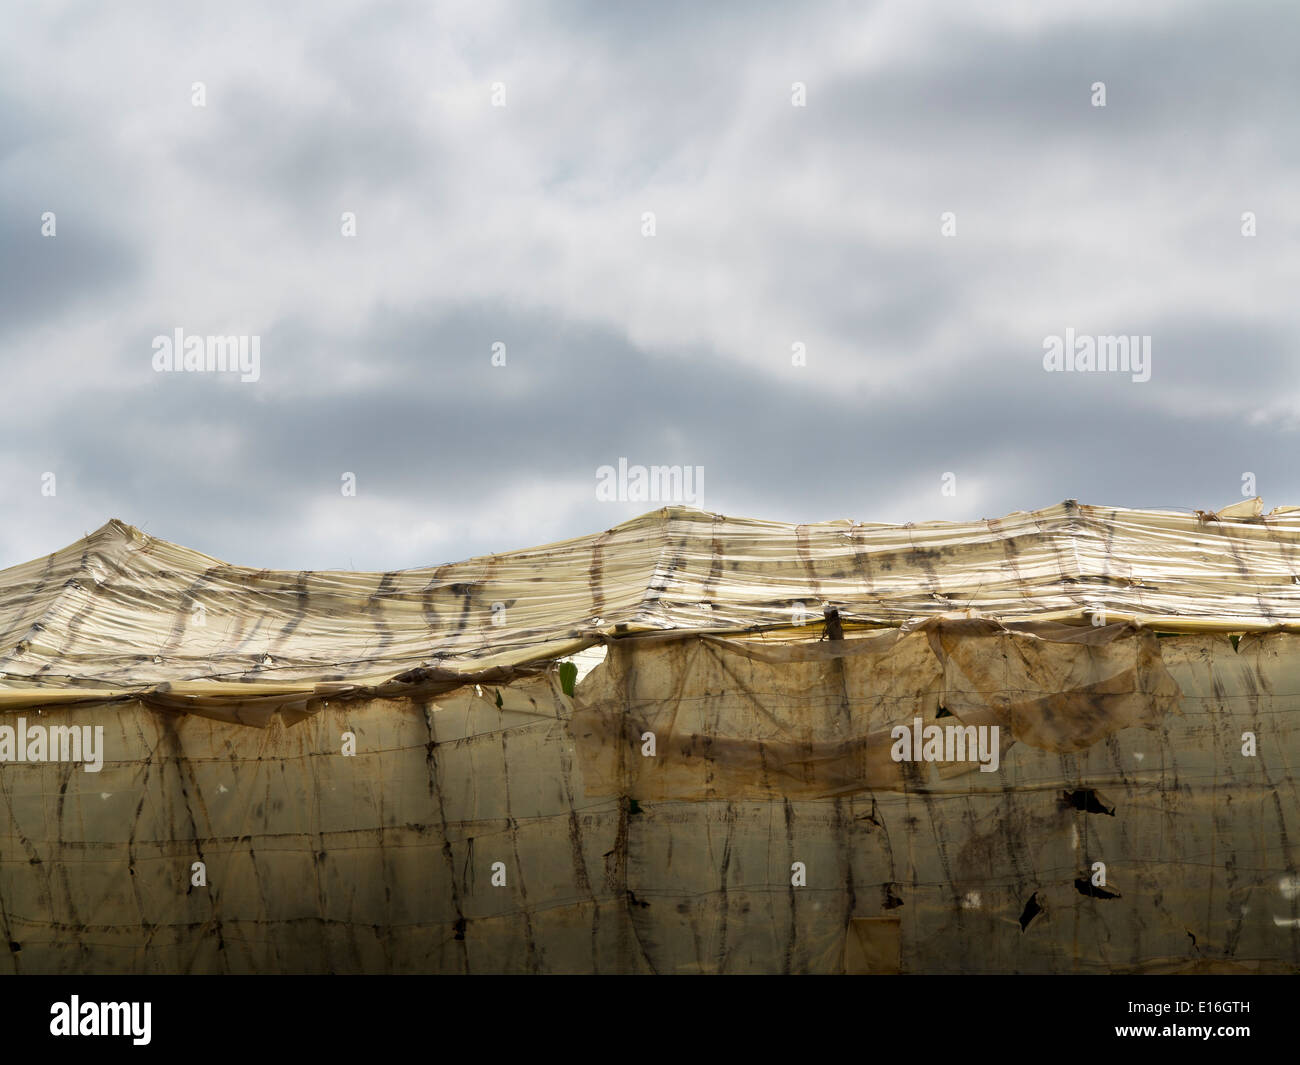 The top canopy of a large polytunnel in a banana plantation against a cloudy sky Stock Photo